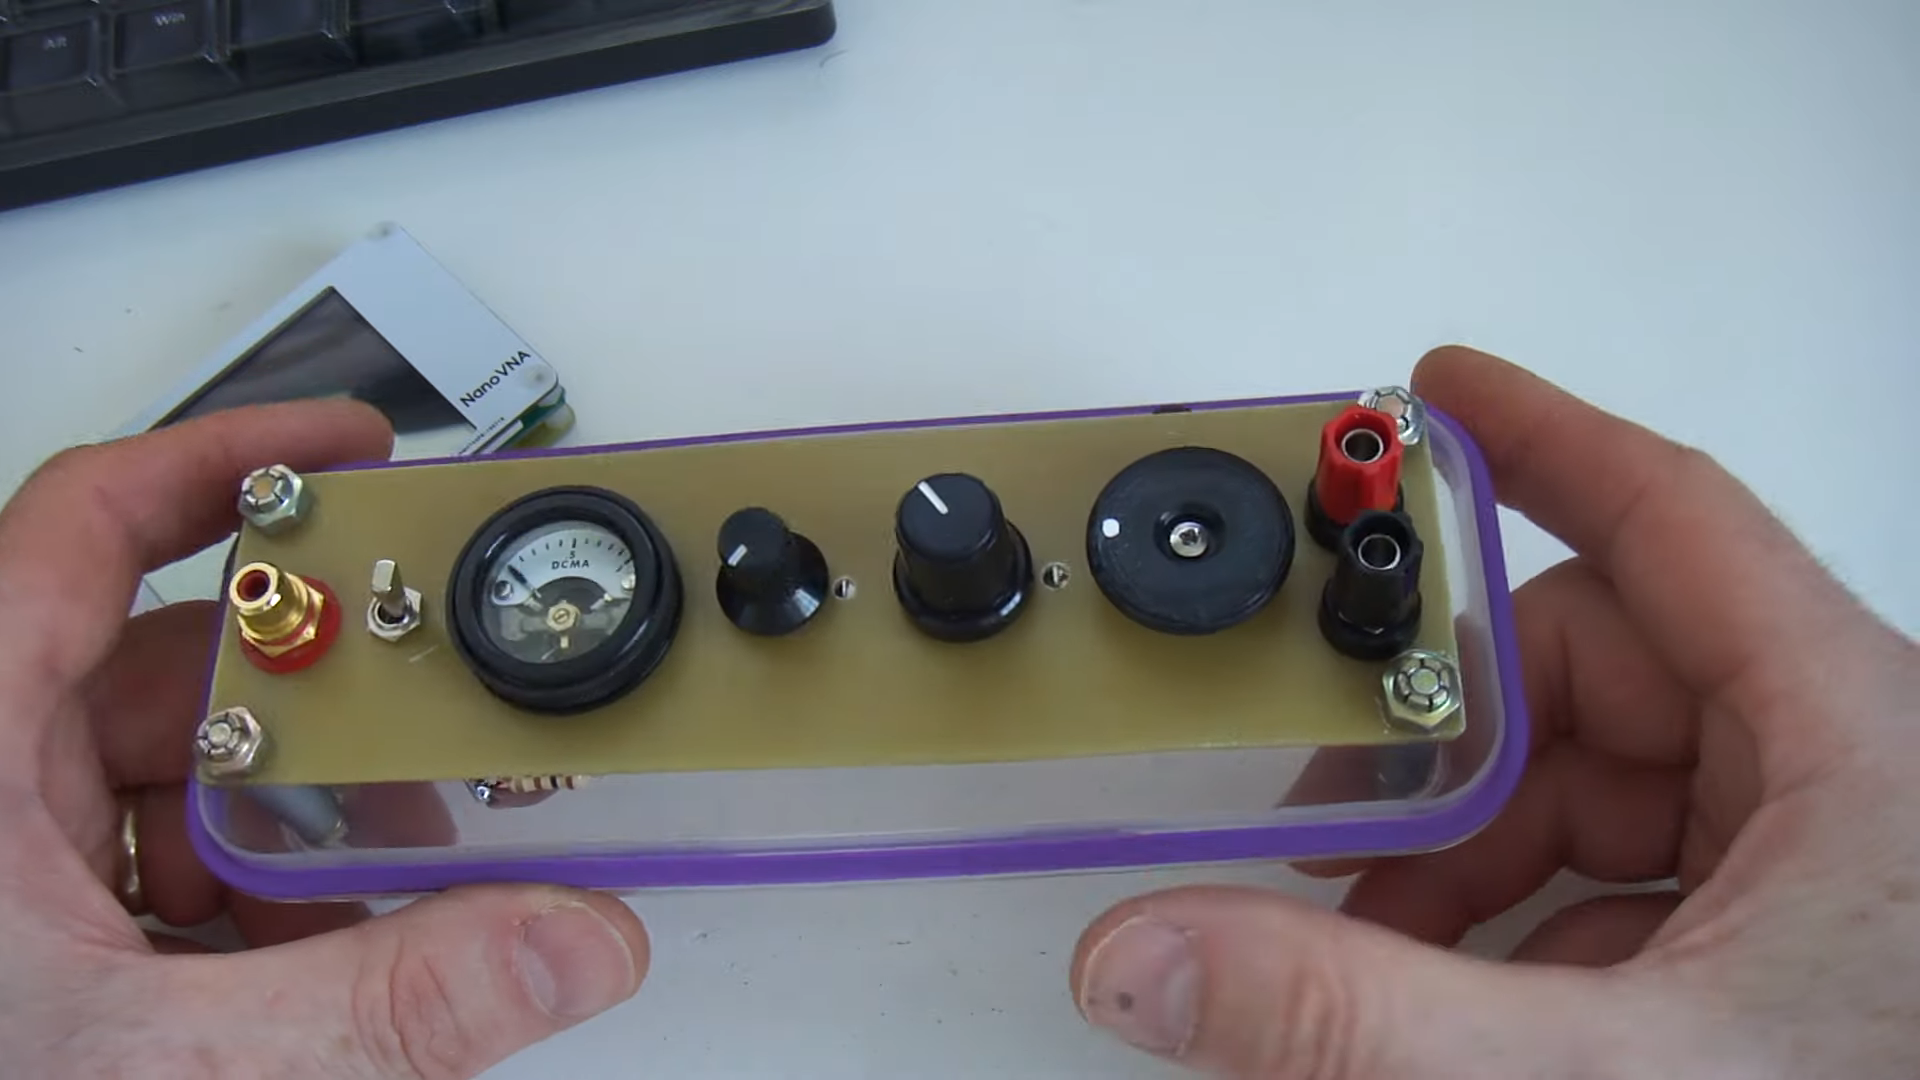 honey reptiles Stationary Manual Antenna Tuner Shows How Homebrewing Is Done | Hackaday